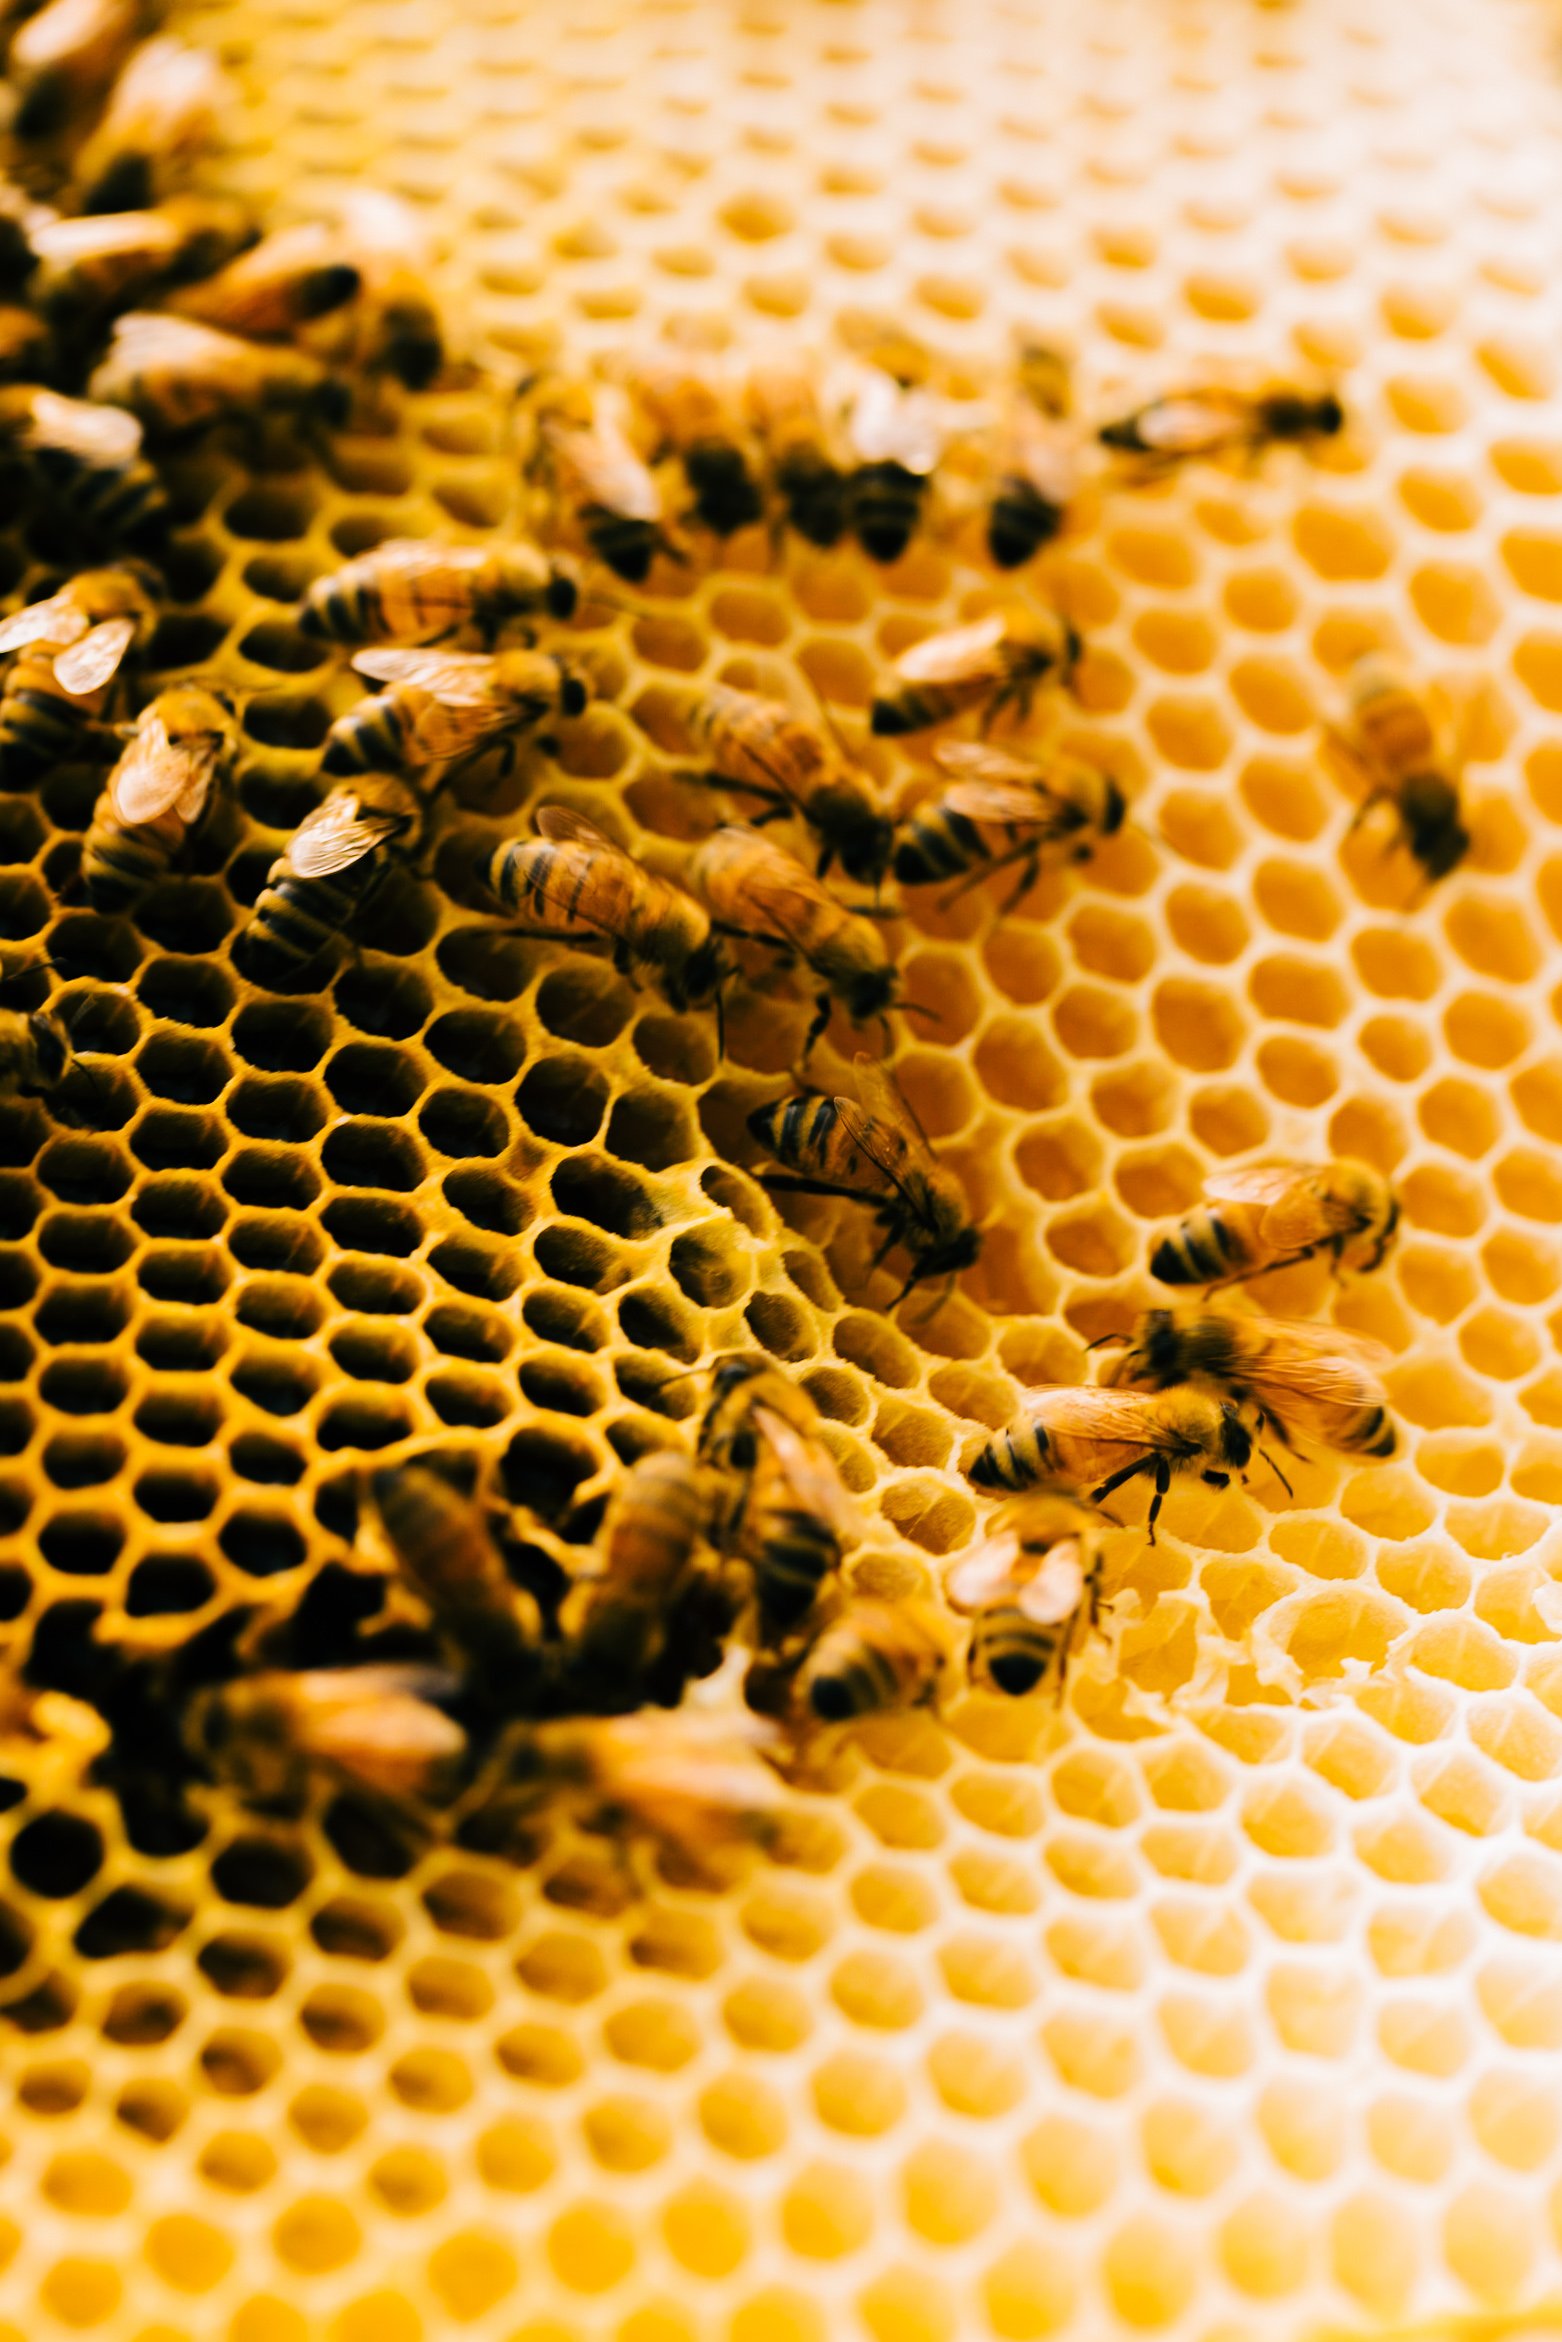  Honey bees working on a honeycomb from their hive - Close up 